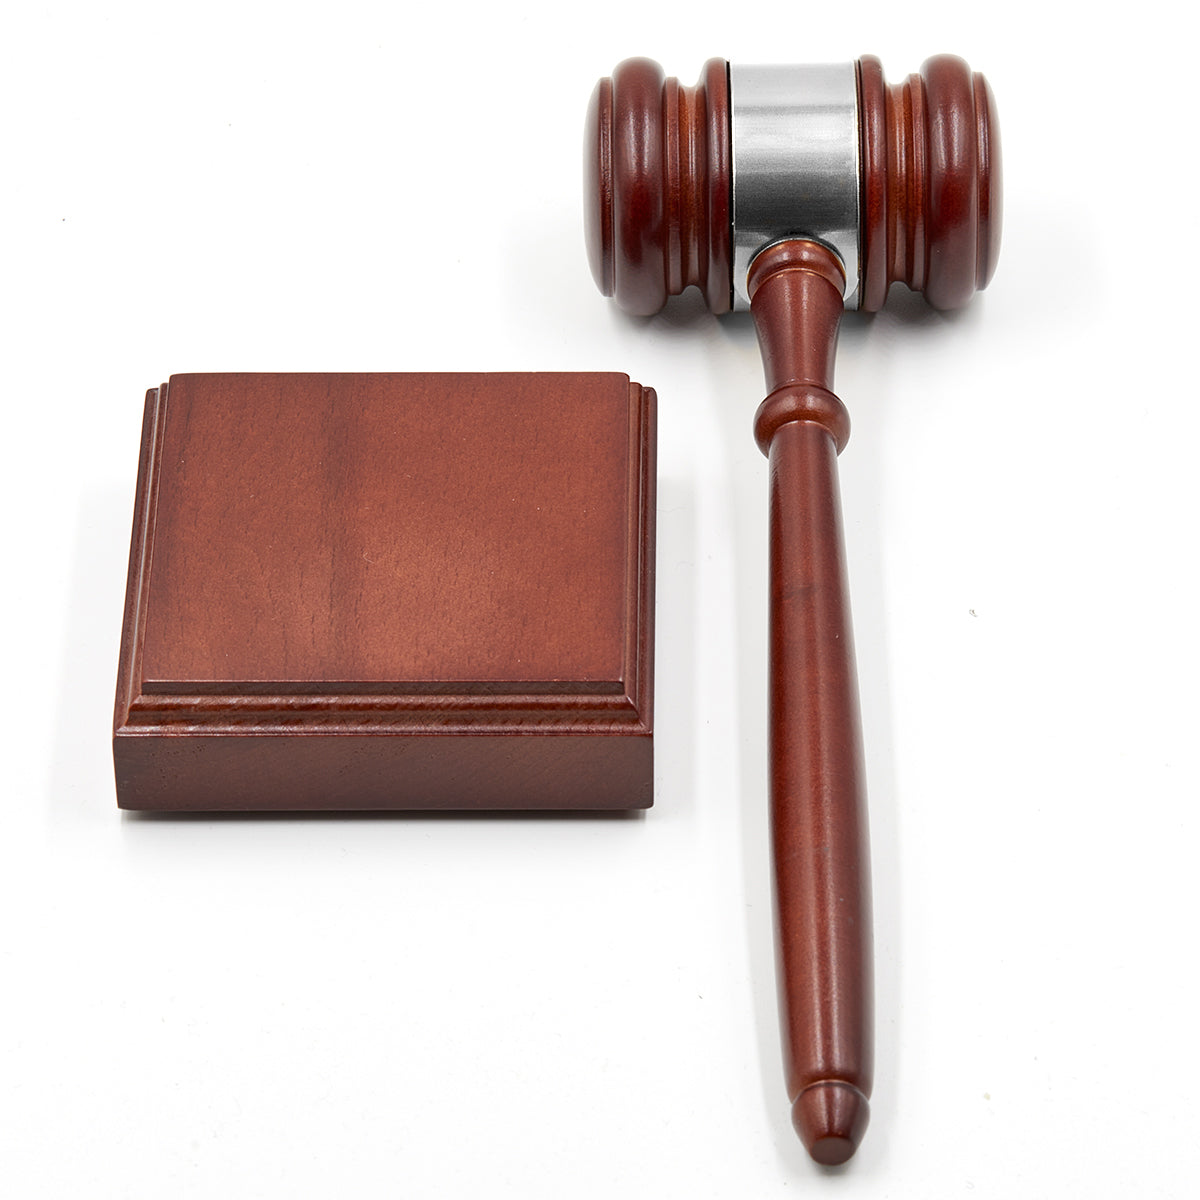 Wooden Gavel and Sound Block for Judge Lawyer Auction (Silver Band)